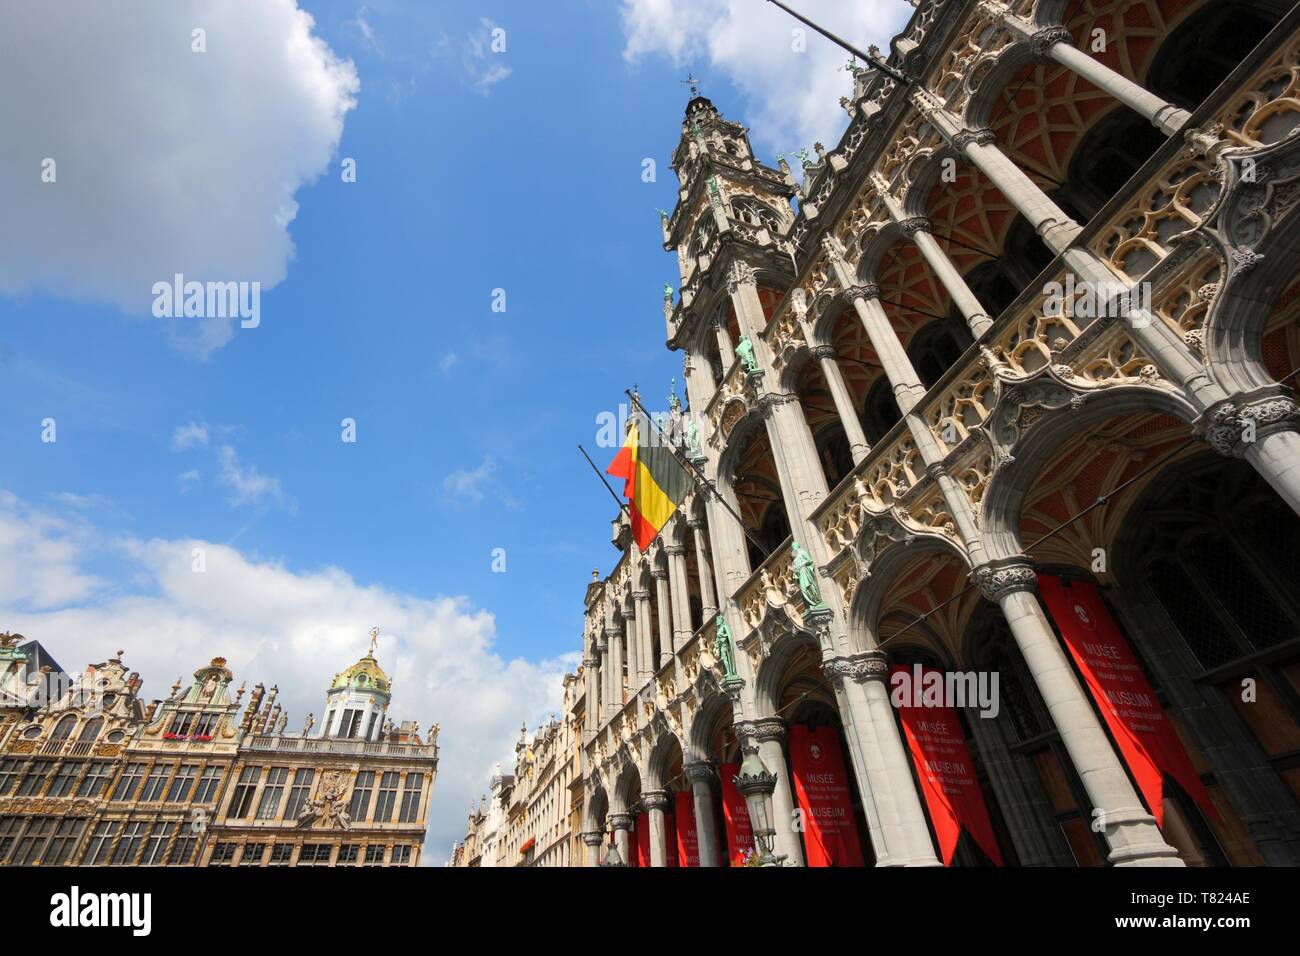 BRUSSELS, BELGIUM - AUGUST 25, 2008: Grand Place view in Brussels, Belgium. Grand Place is a UNESCO World Heritage Site. It features old guild halls a Stock Photo